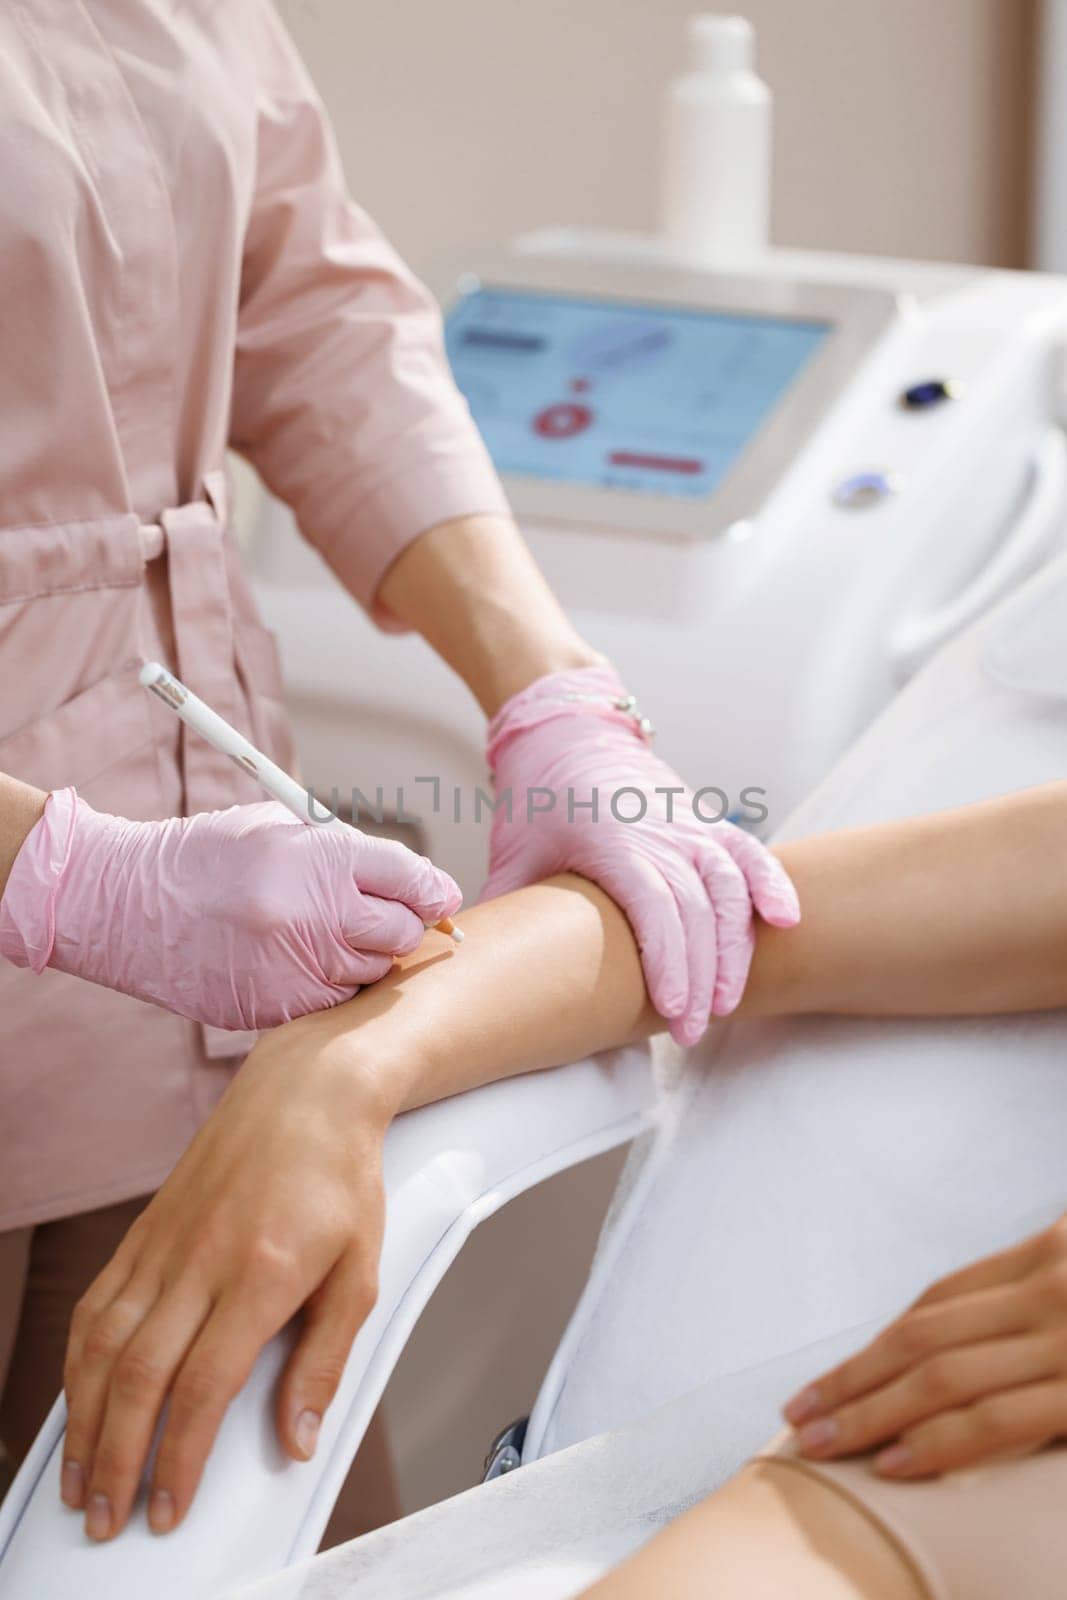 Laser hair removal specialist draws on moles on the woman's hand with a protective pencil. Women's hands in gloves mark the area for epilation and protection of moles with a pencil.